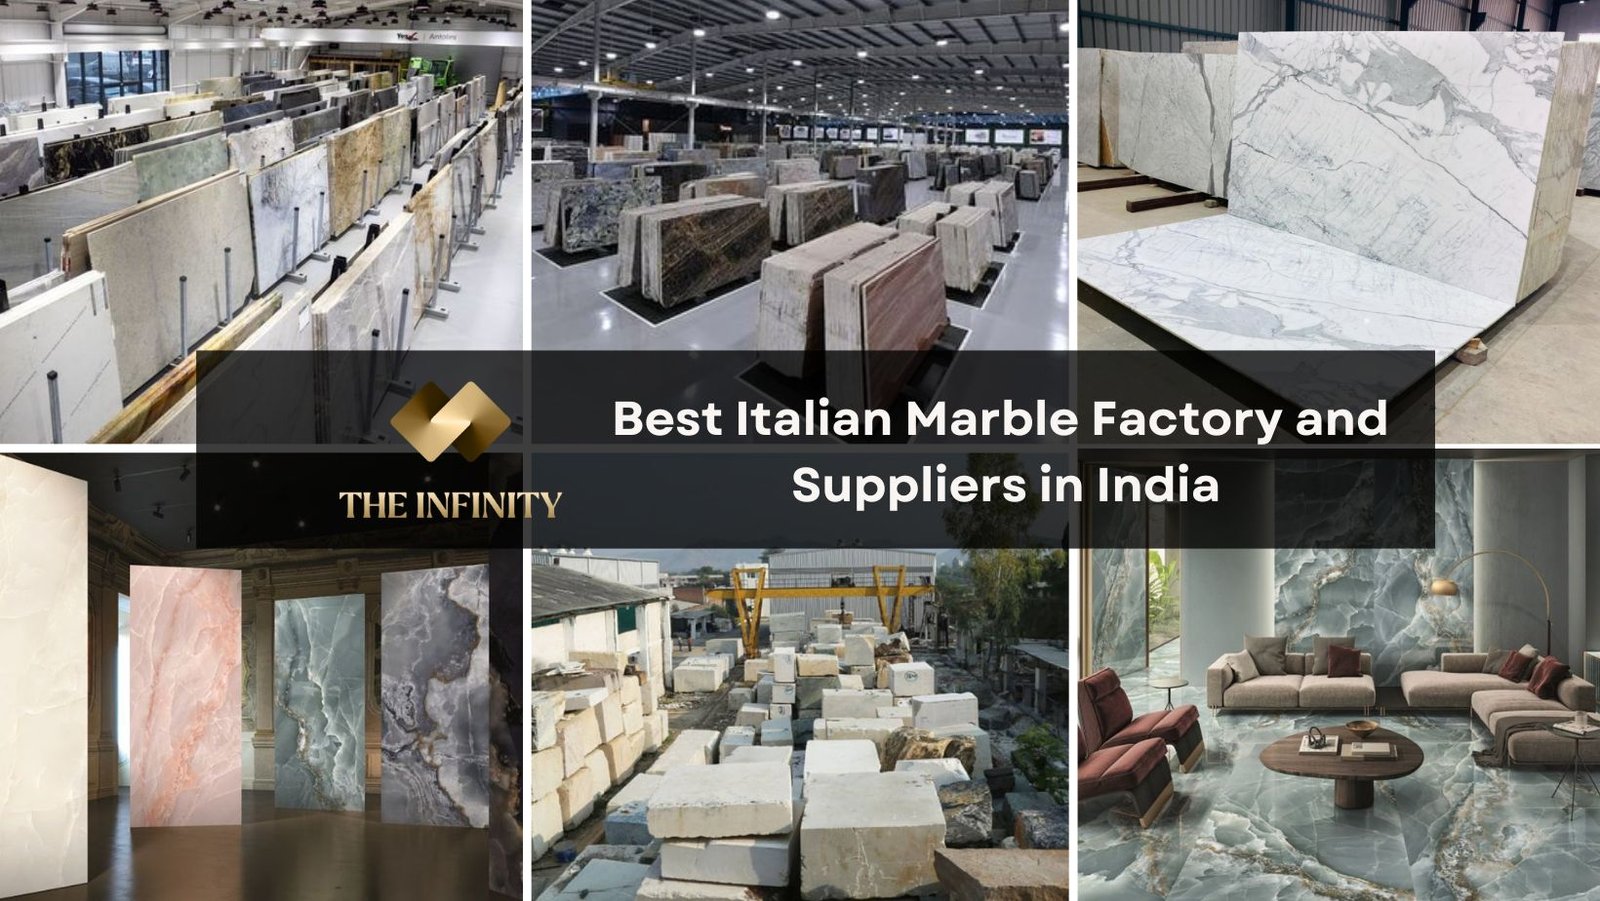 Best Italian Marble Factory and Suppliers in India